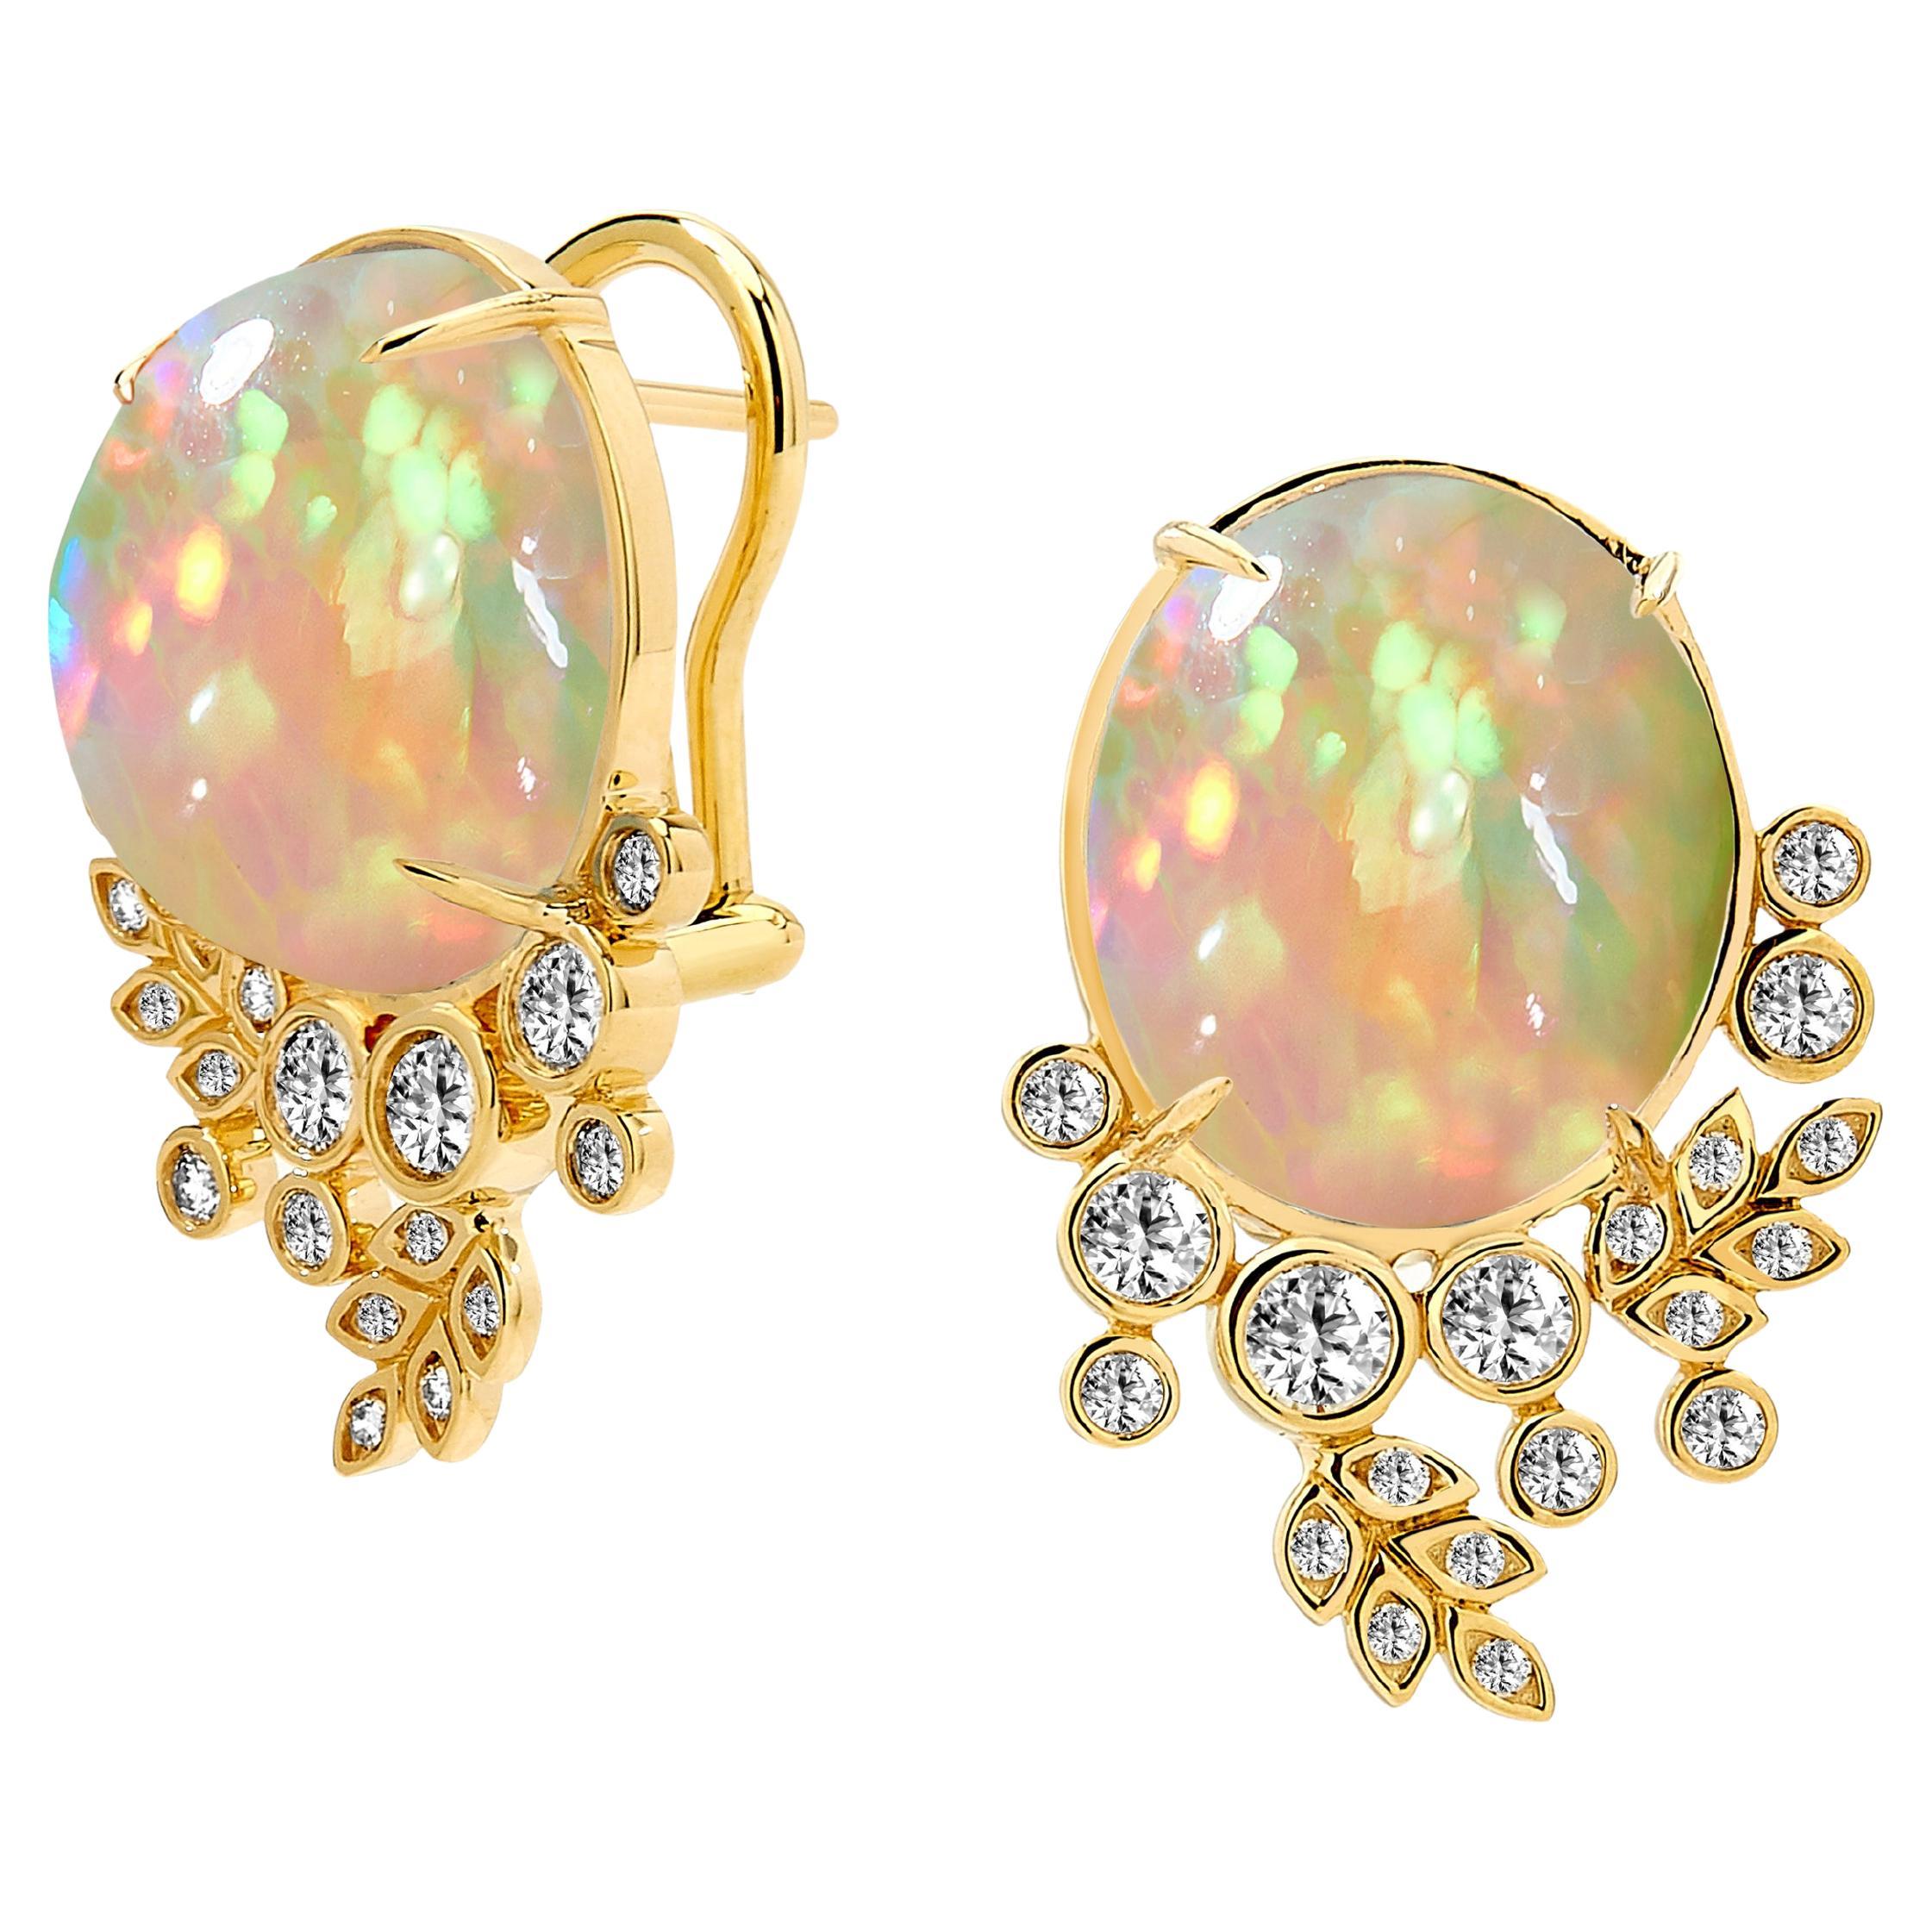 Syna Yellow Gold Vine Earrings with Ethiopian Opal and Diamonds